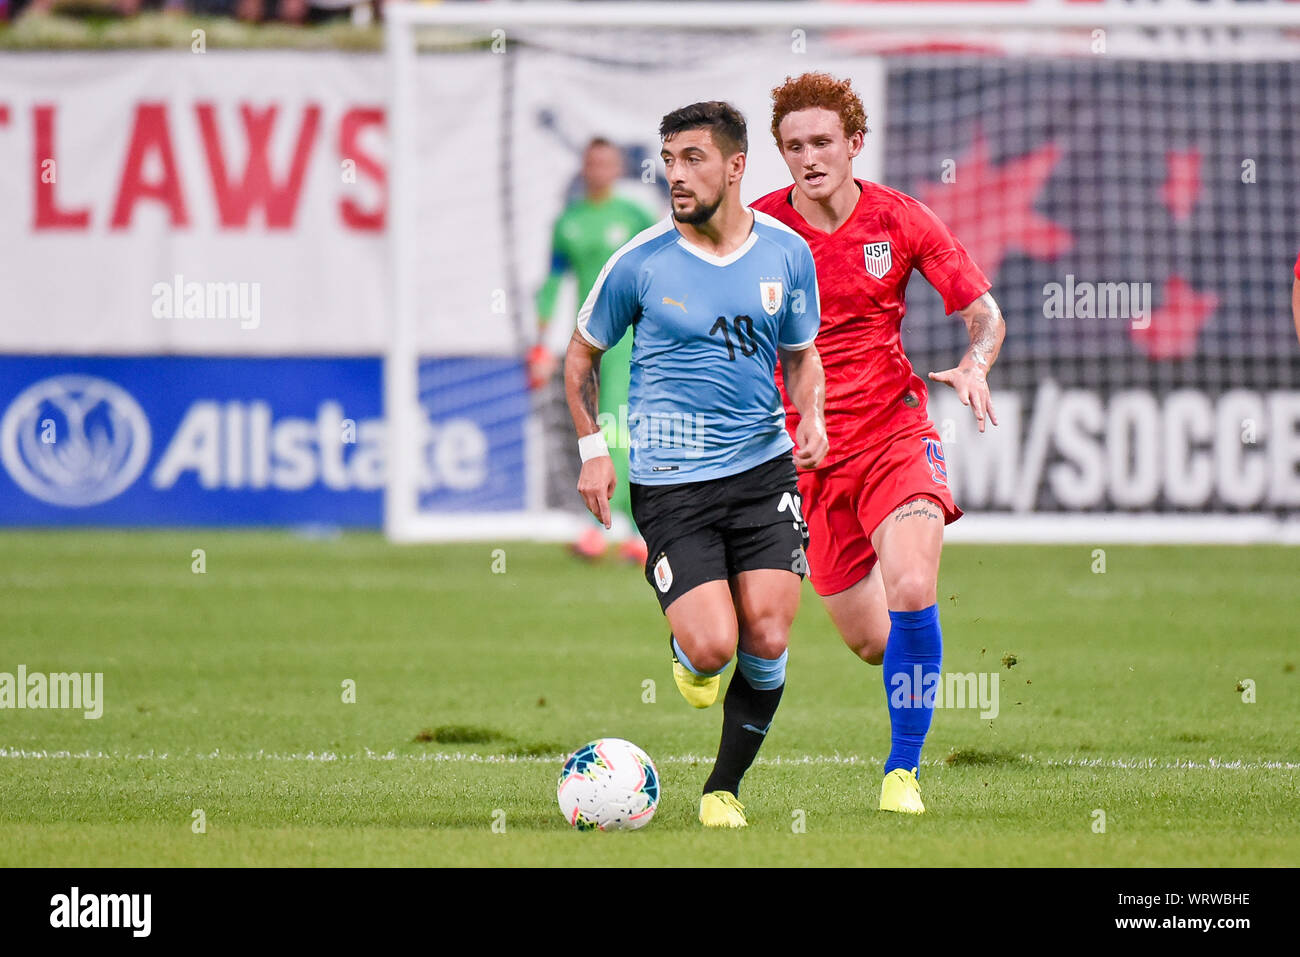 St. Louis, Missouri, USA. 10th Sep, 2019. Uruguay midfielder Giorgian De Arrascaeta (10) rushes the ball up field during the final match before the Concacaf Nations League as the United States Men's National Team hosted Uruguay at Busch Stadium in St. Louis City, MO Ulreich/CSM/Alamy Live News Stock Photo